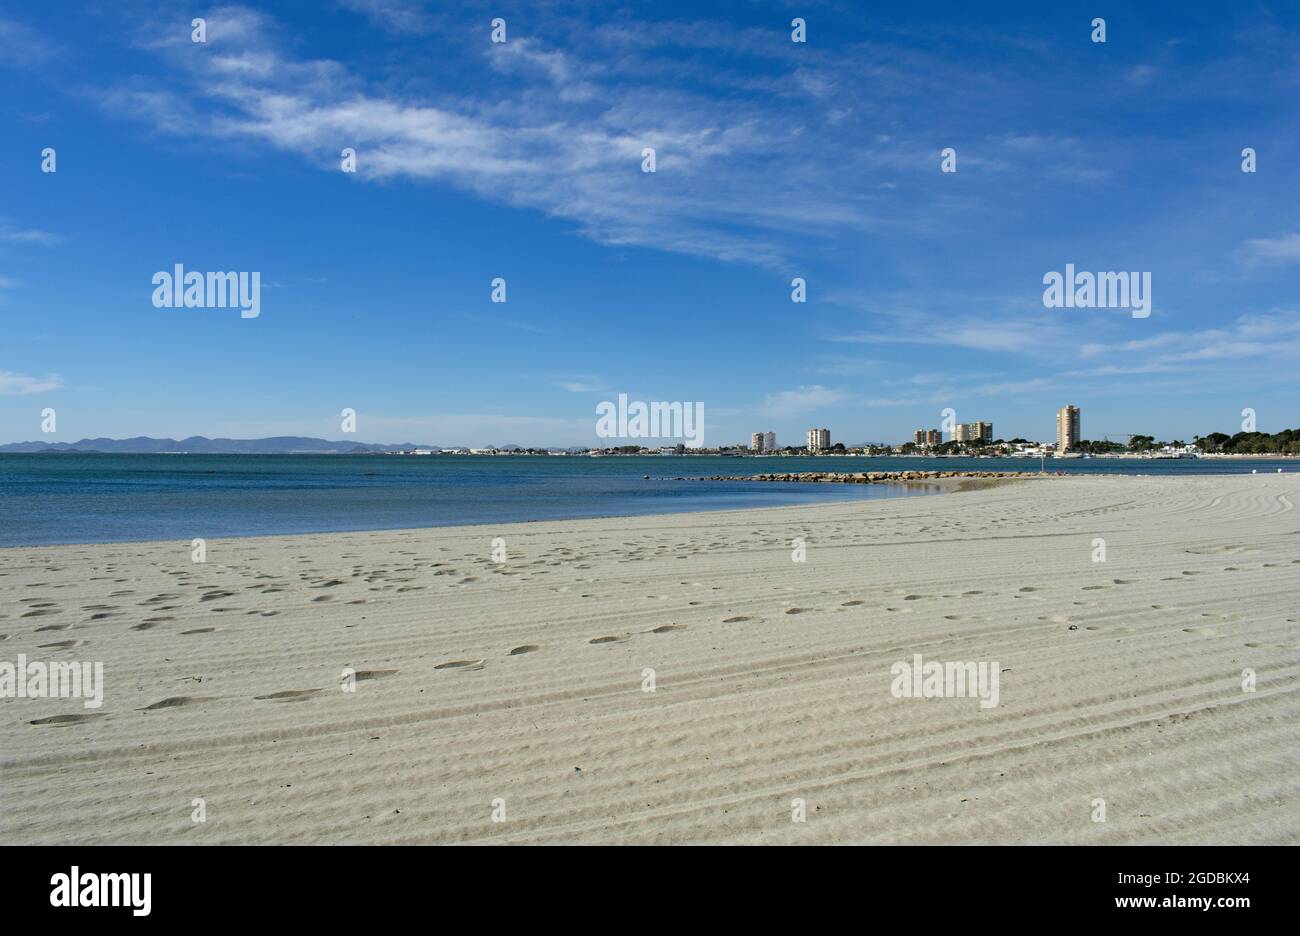 Sandy, pristine beach at the Mar Menor, Lo Pagan, Murcia, southern Spain. Peaceful tranquil scene with clear blue skies - copy space. Stock Photo